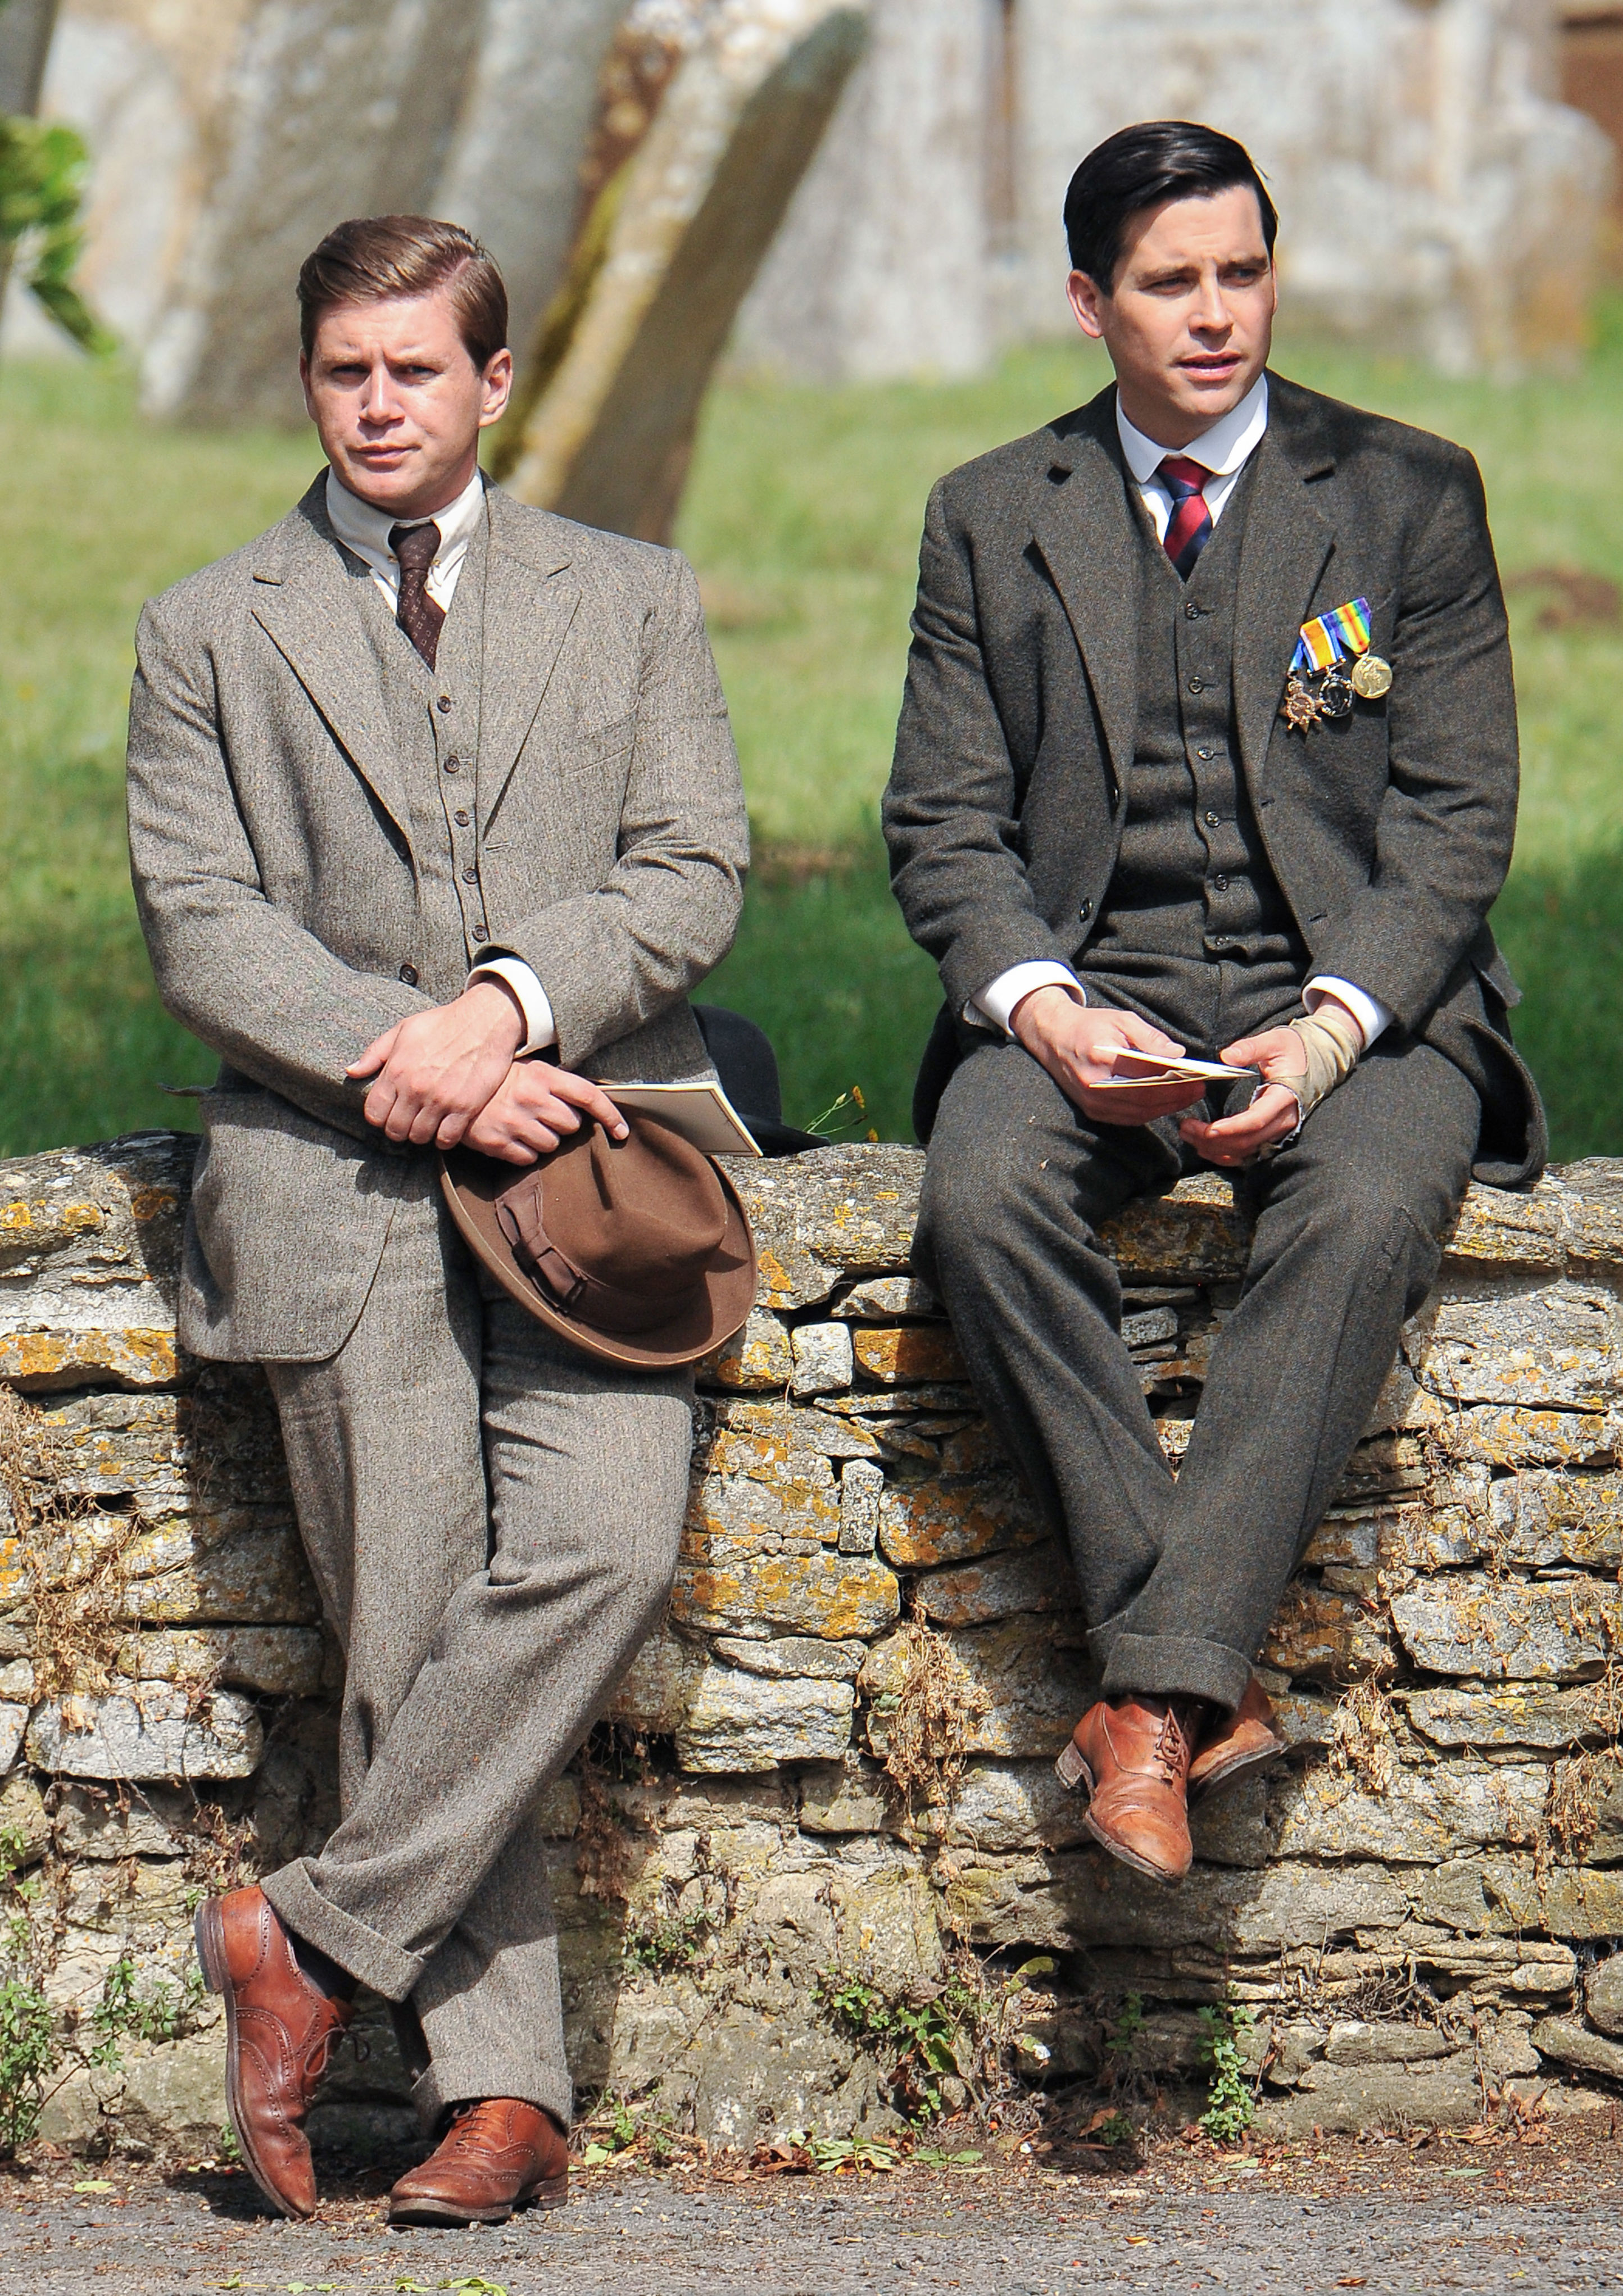 <p>The men's looks on "Downton Abbey" are period-perfect too. Here's Allen Leech (as chauffeur-turned-Crawley son-in-law Tom Branson) and Rob James-Collier (as servant Thomas Barrow out of uniform) on the set of the show in 2014.</p>